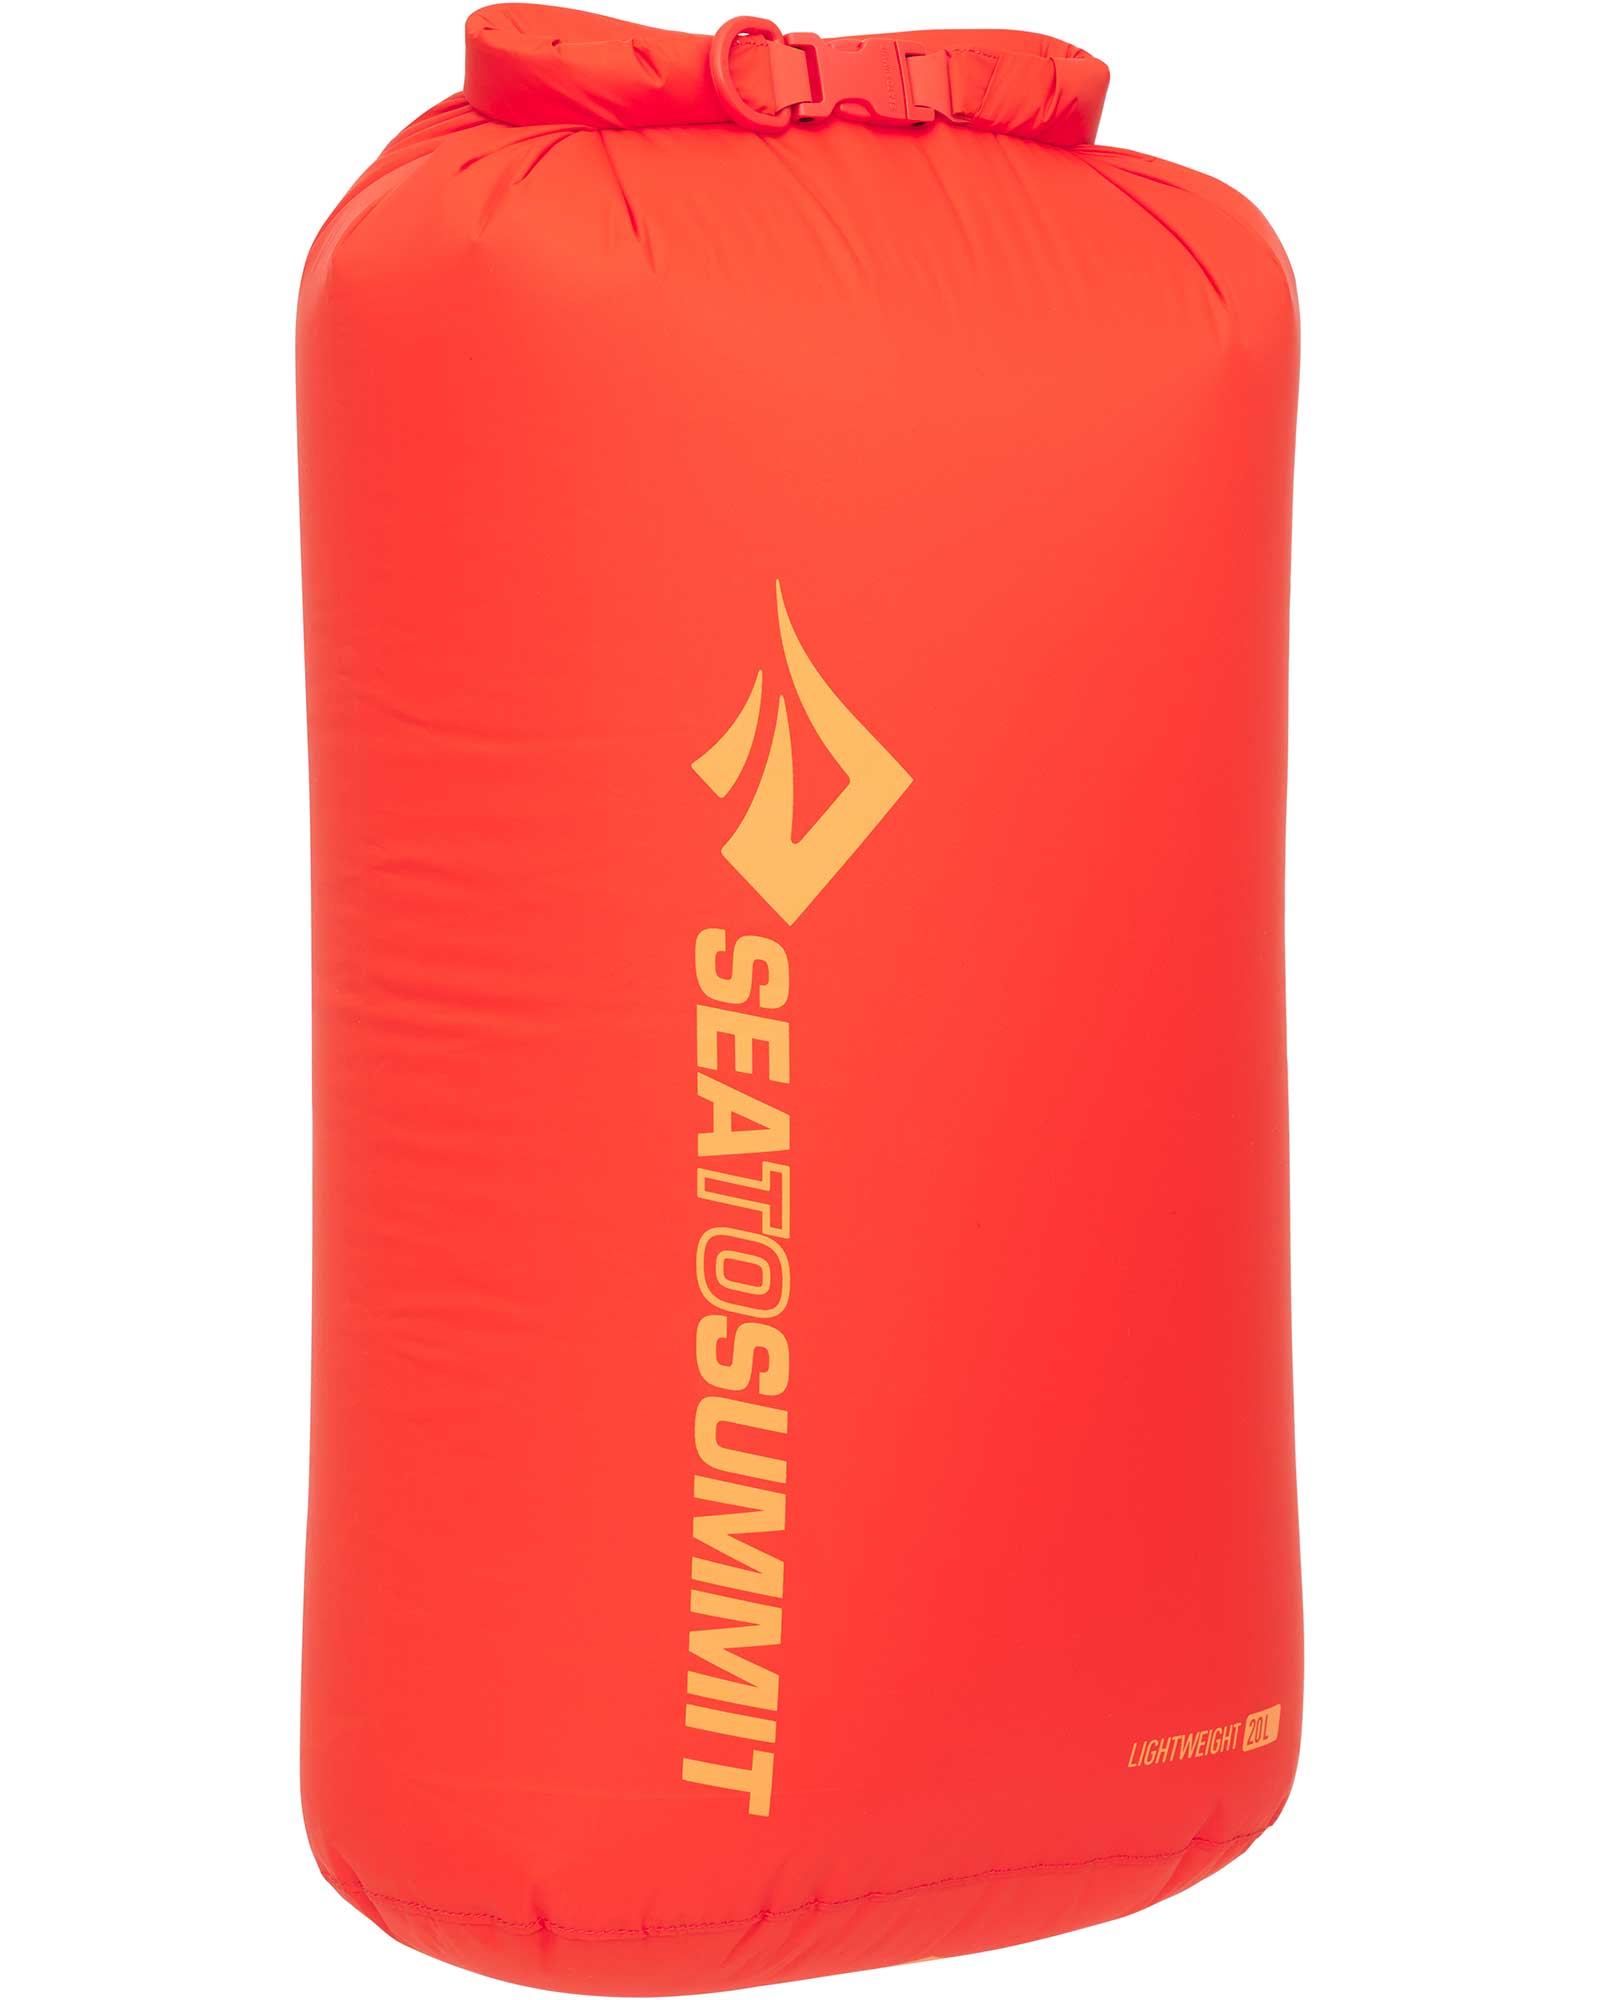 Sea To Summit Lightweight Dry Bag 20l Dry Bags